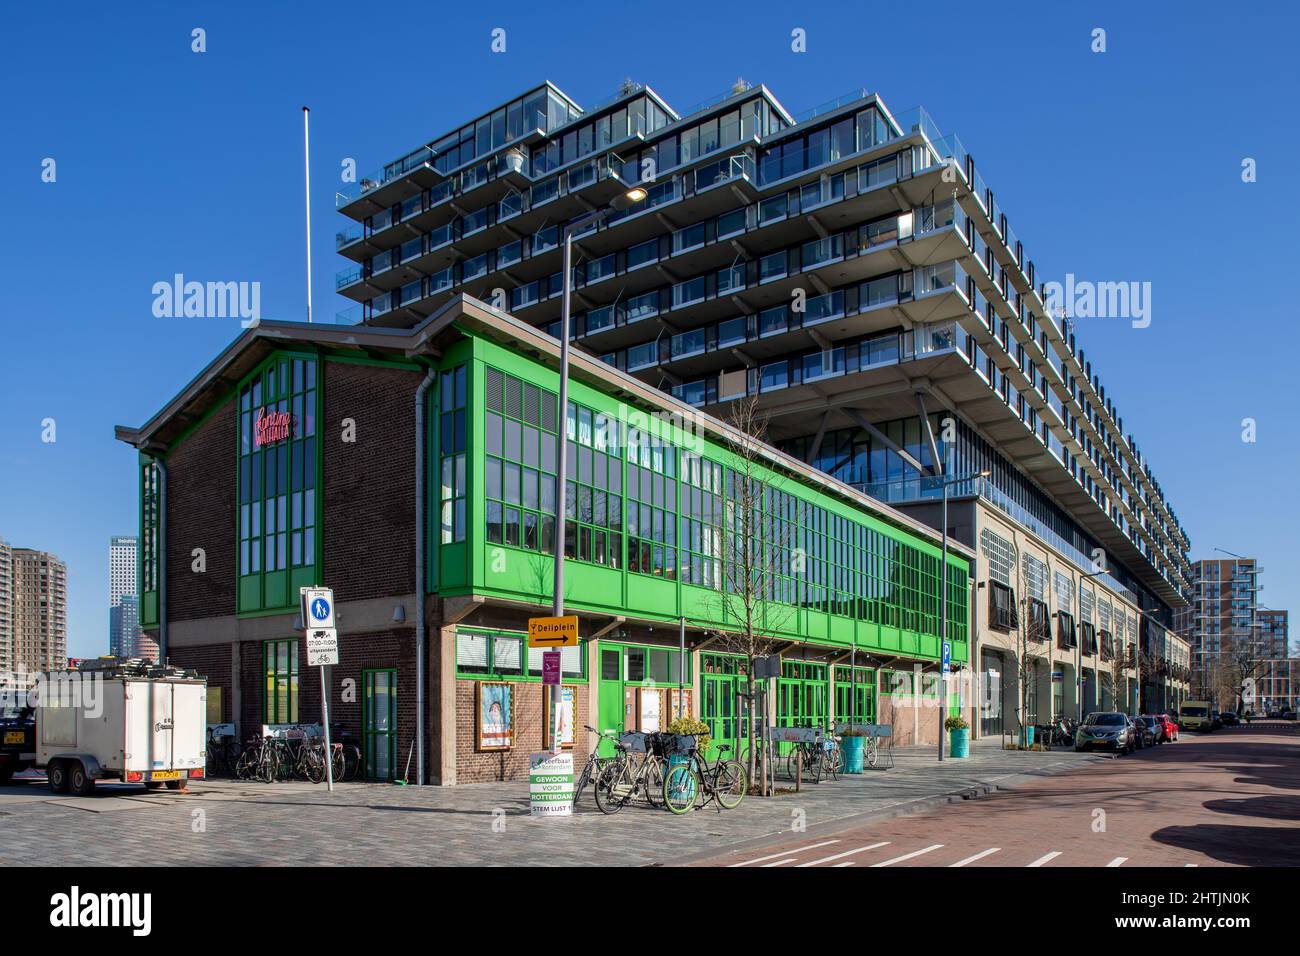 Theatre Kantine Walhalla with Fenix 1 appartment building in Katendrecht, Rotterdam, the Netherlands Stock Photo